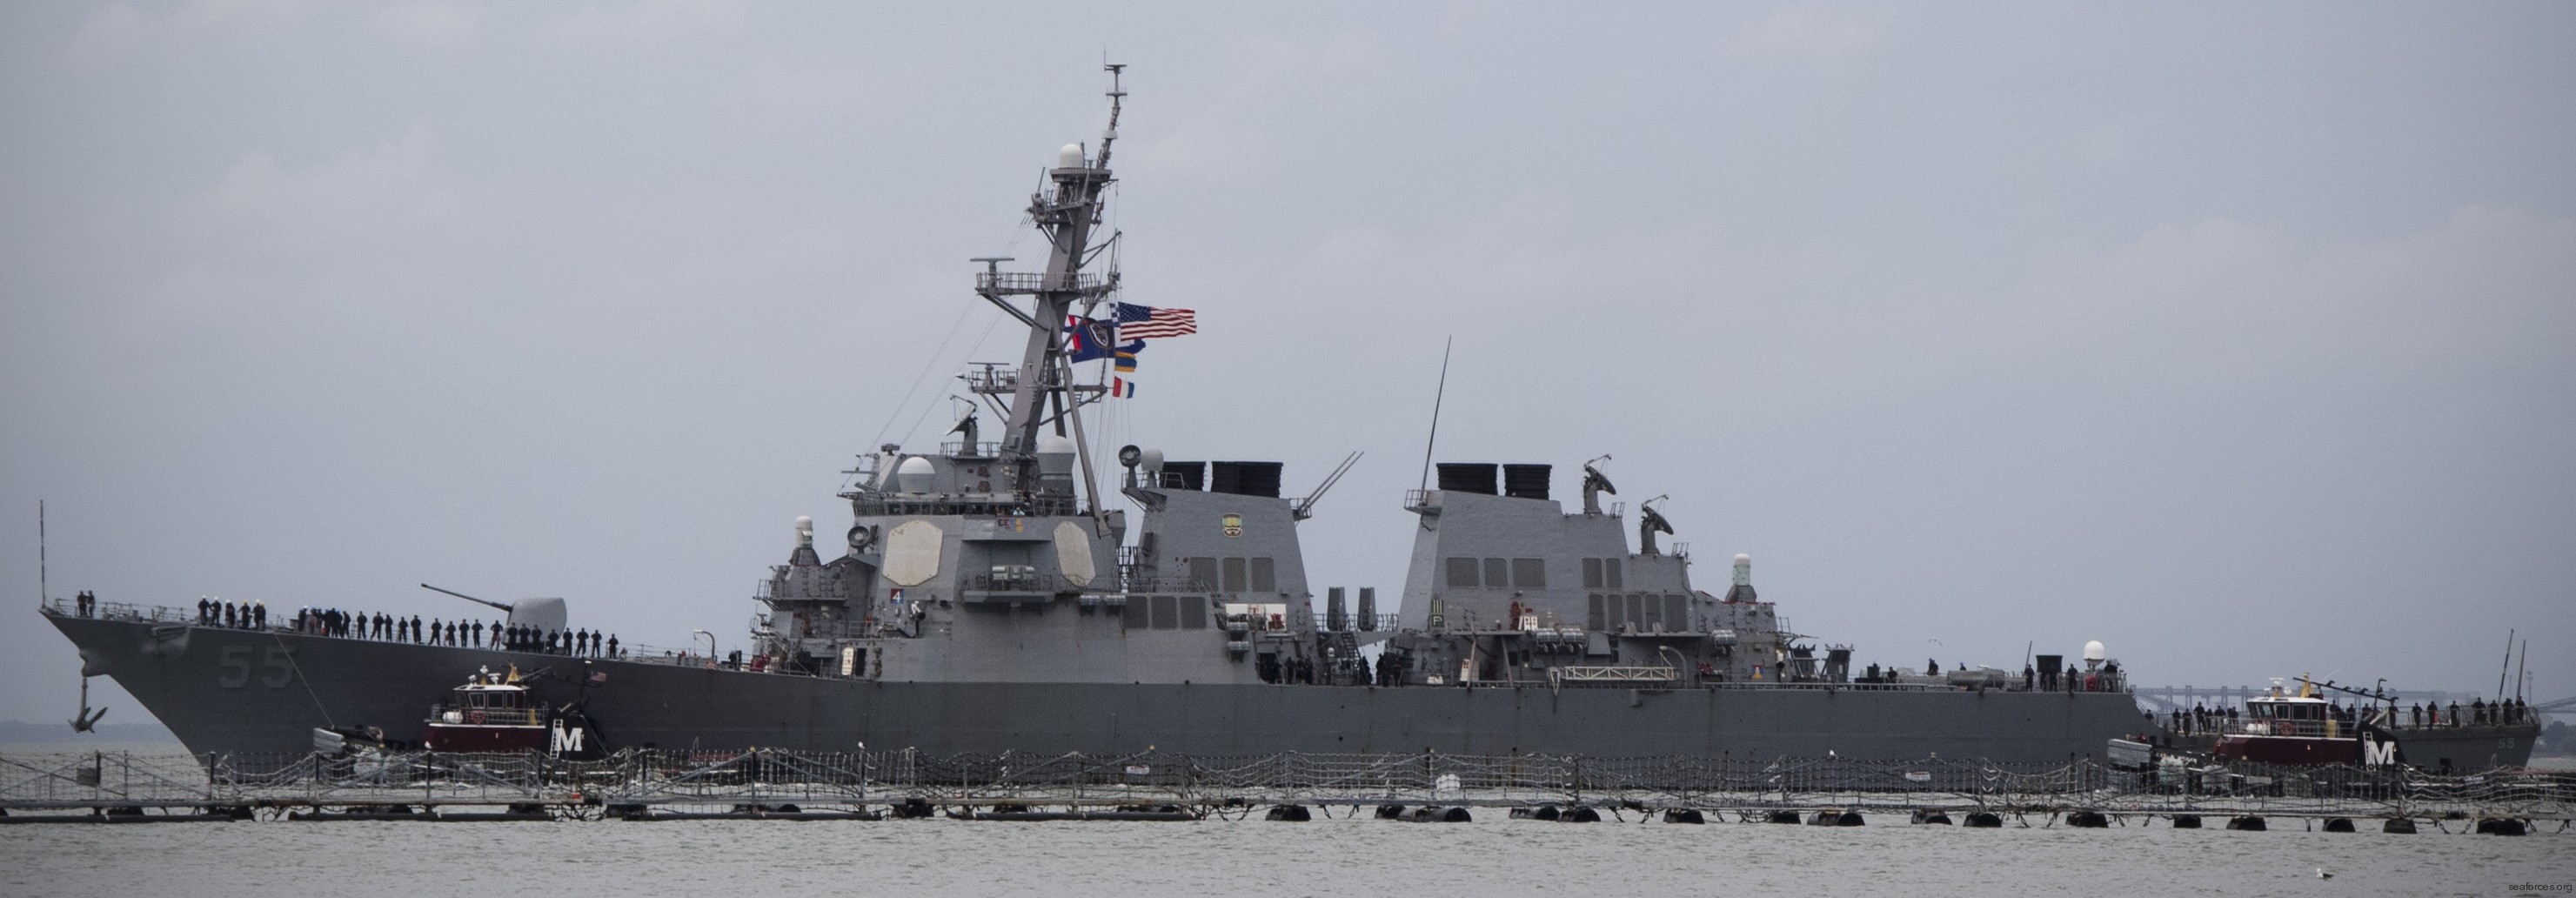 ddg-55 uss stout arleigh burke class guided missile destroyer us navy 98